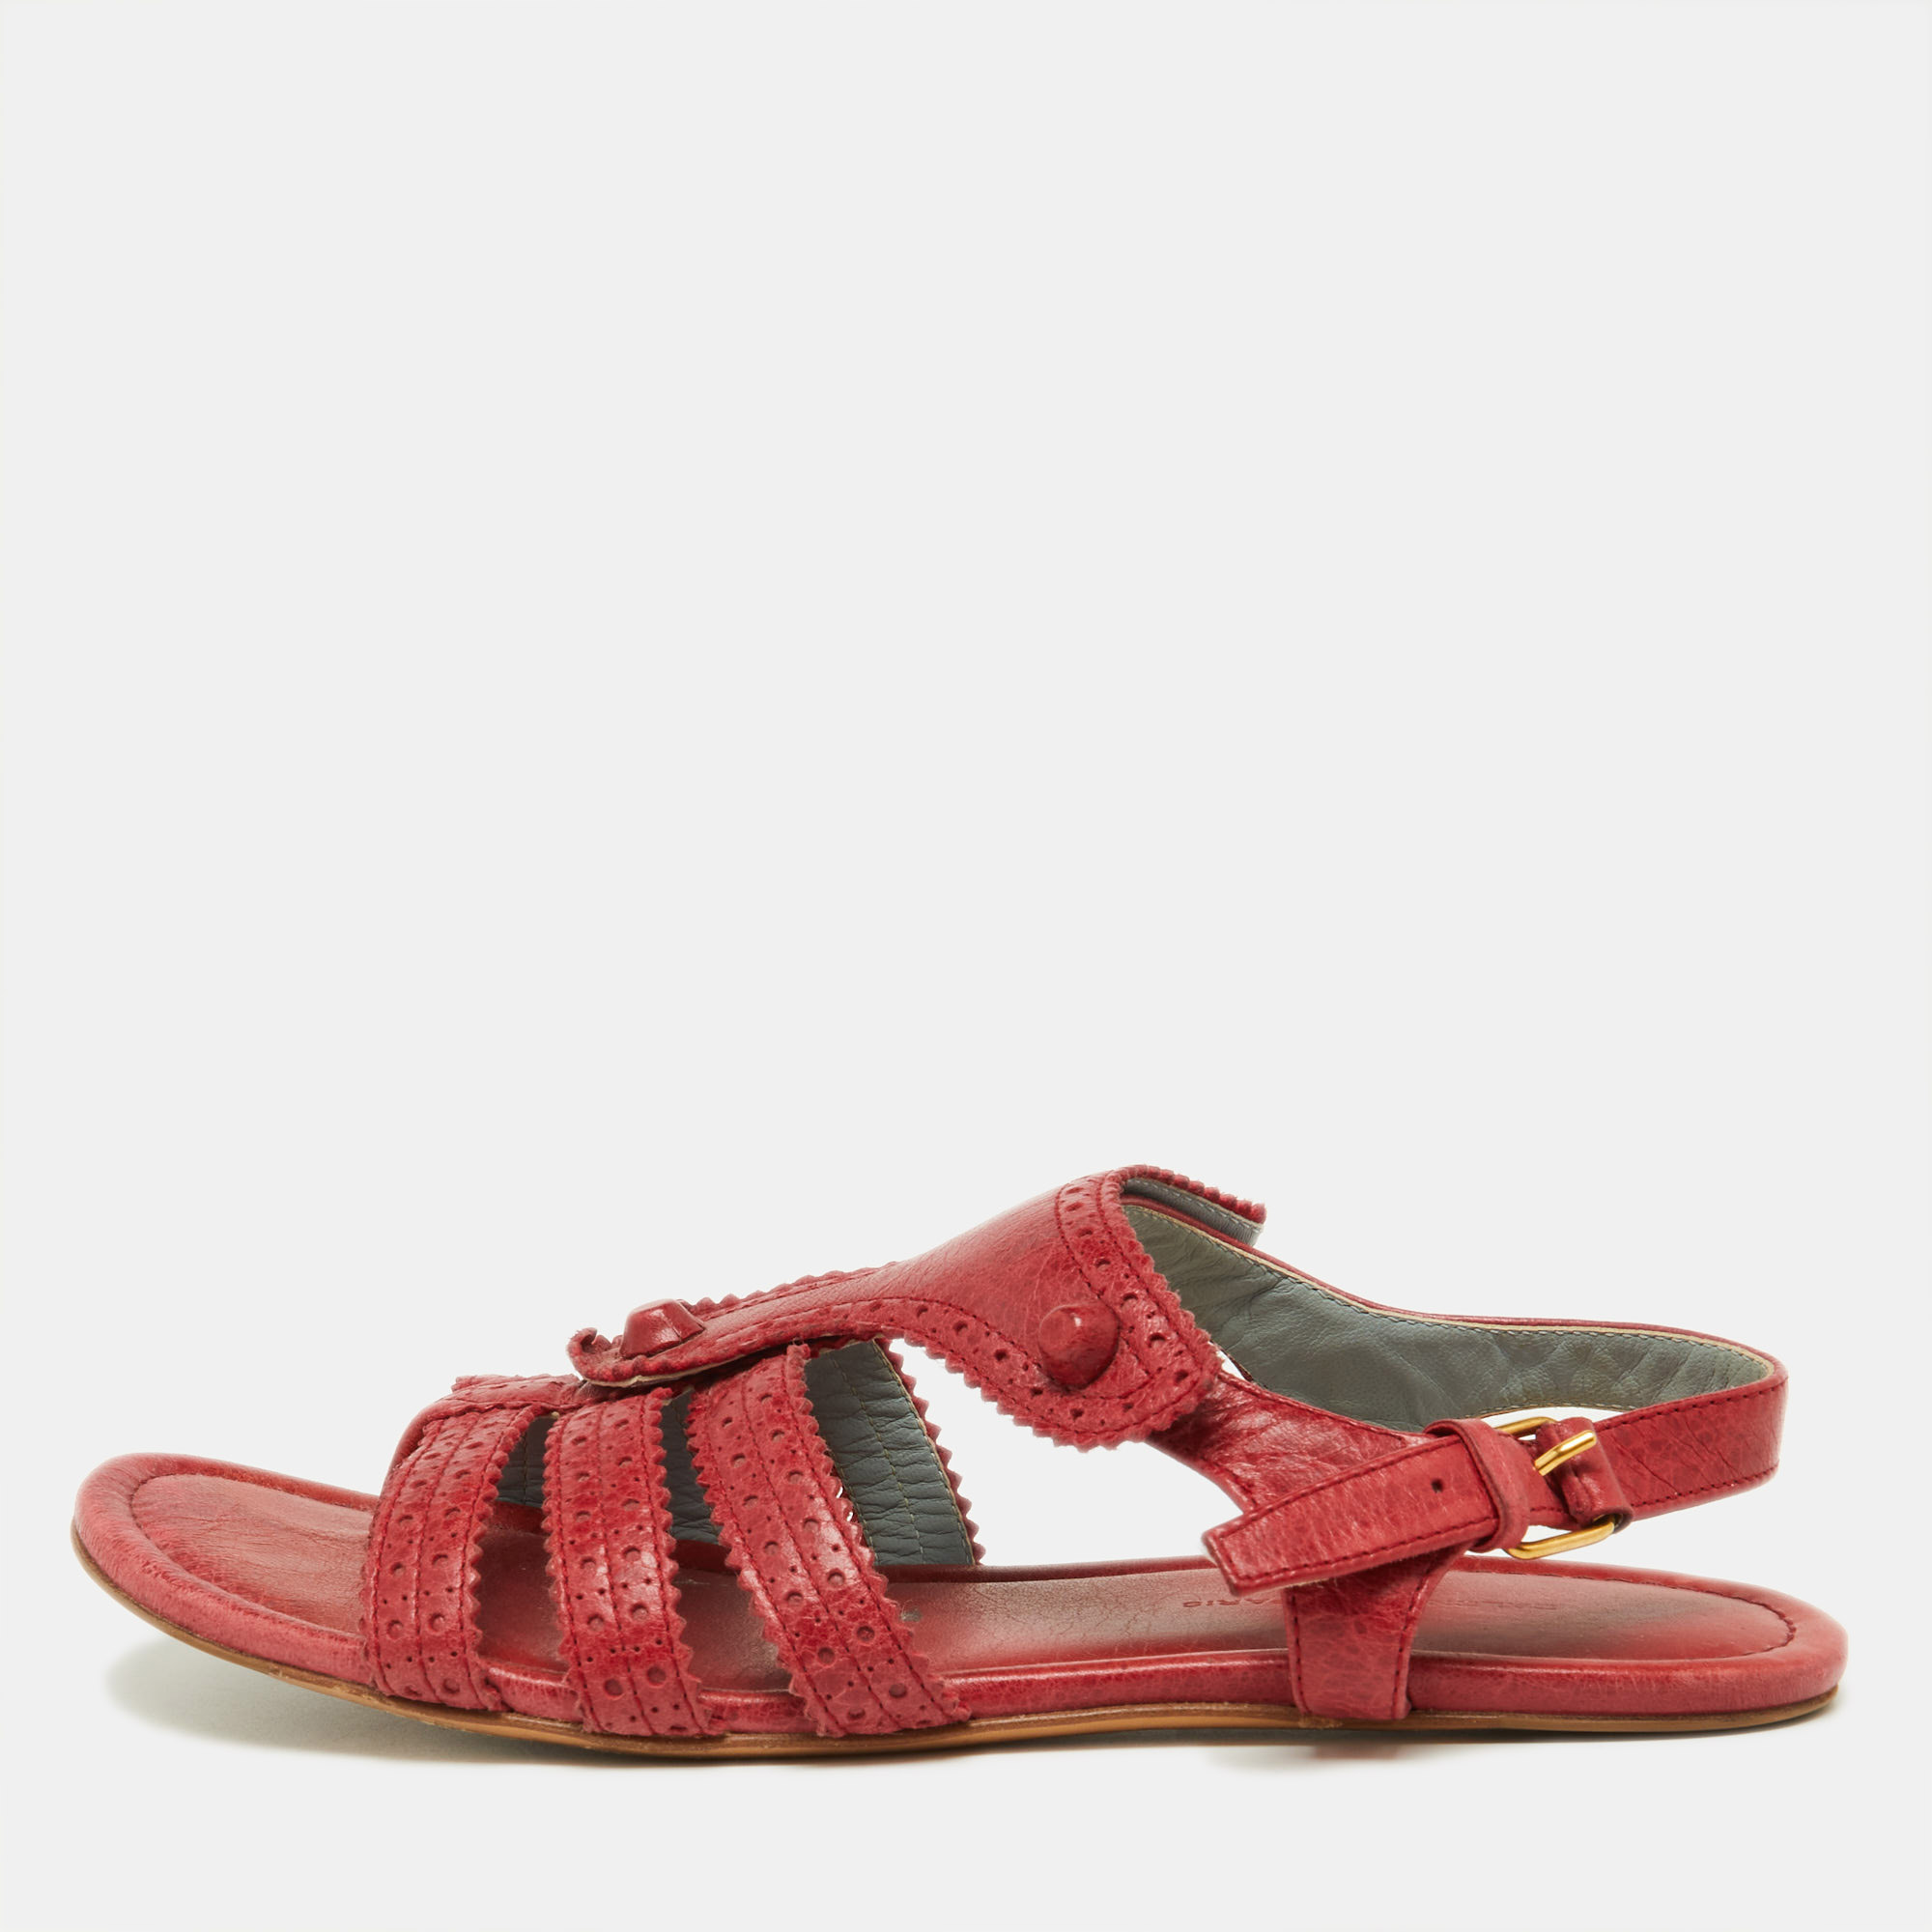 Balenciaga red leather arena t-strap flat sandals size 39